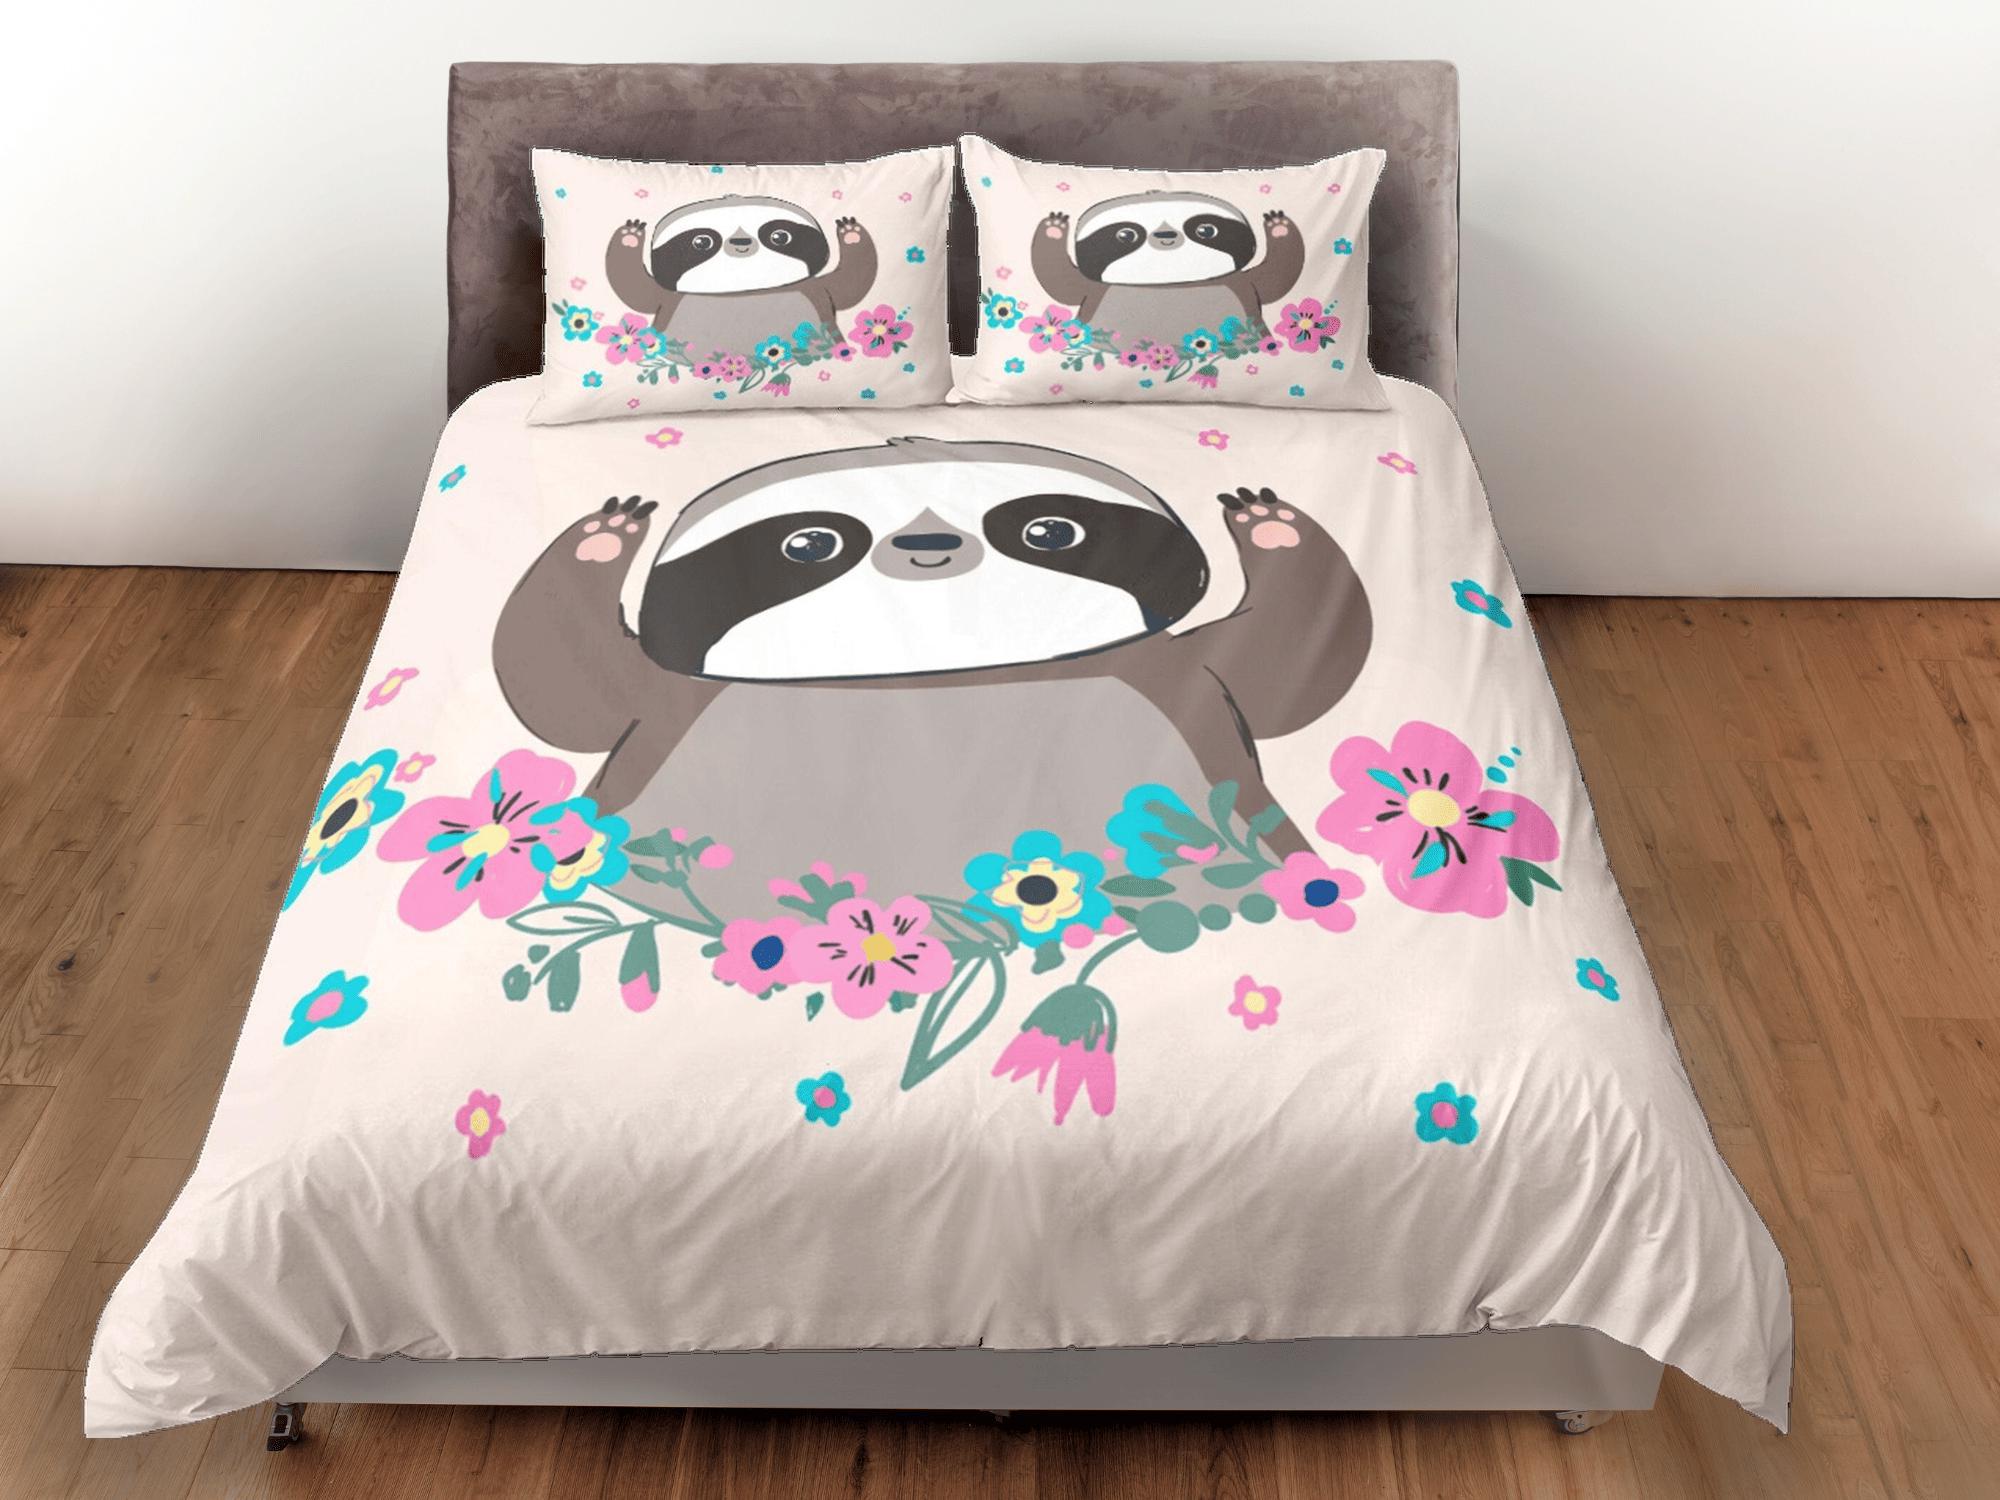 daintyduvet Cute Sloth Girly Duvet Cover Set Colorful Bedspread, Kids Full Bedding Set with Pillowcase, Comforter Cover Twin